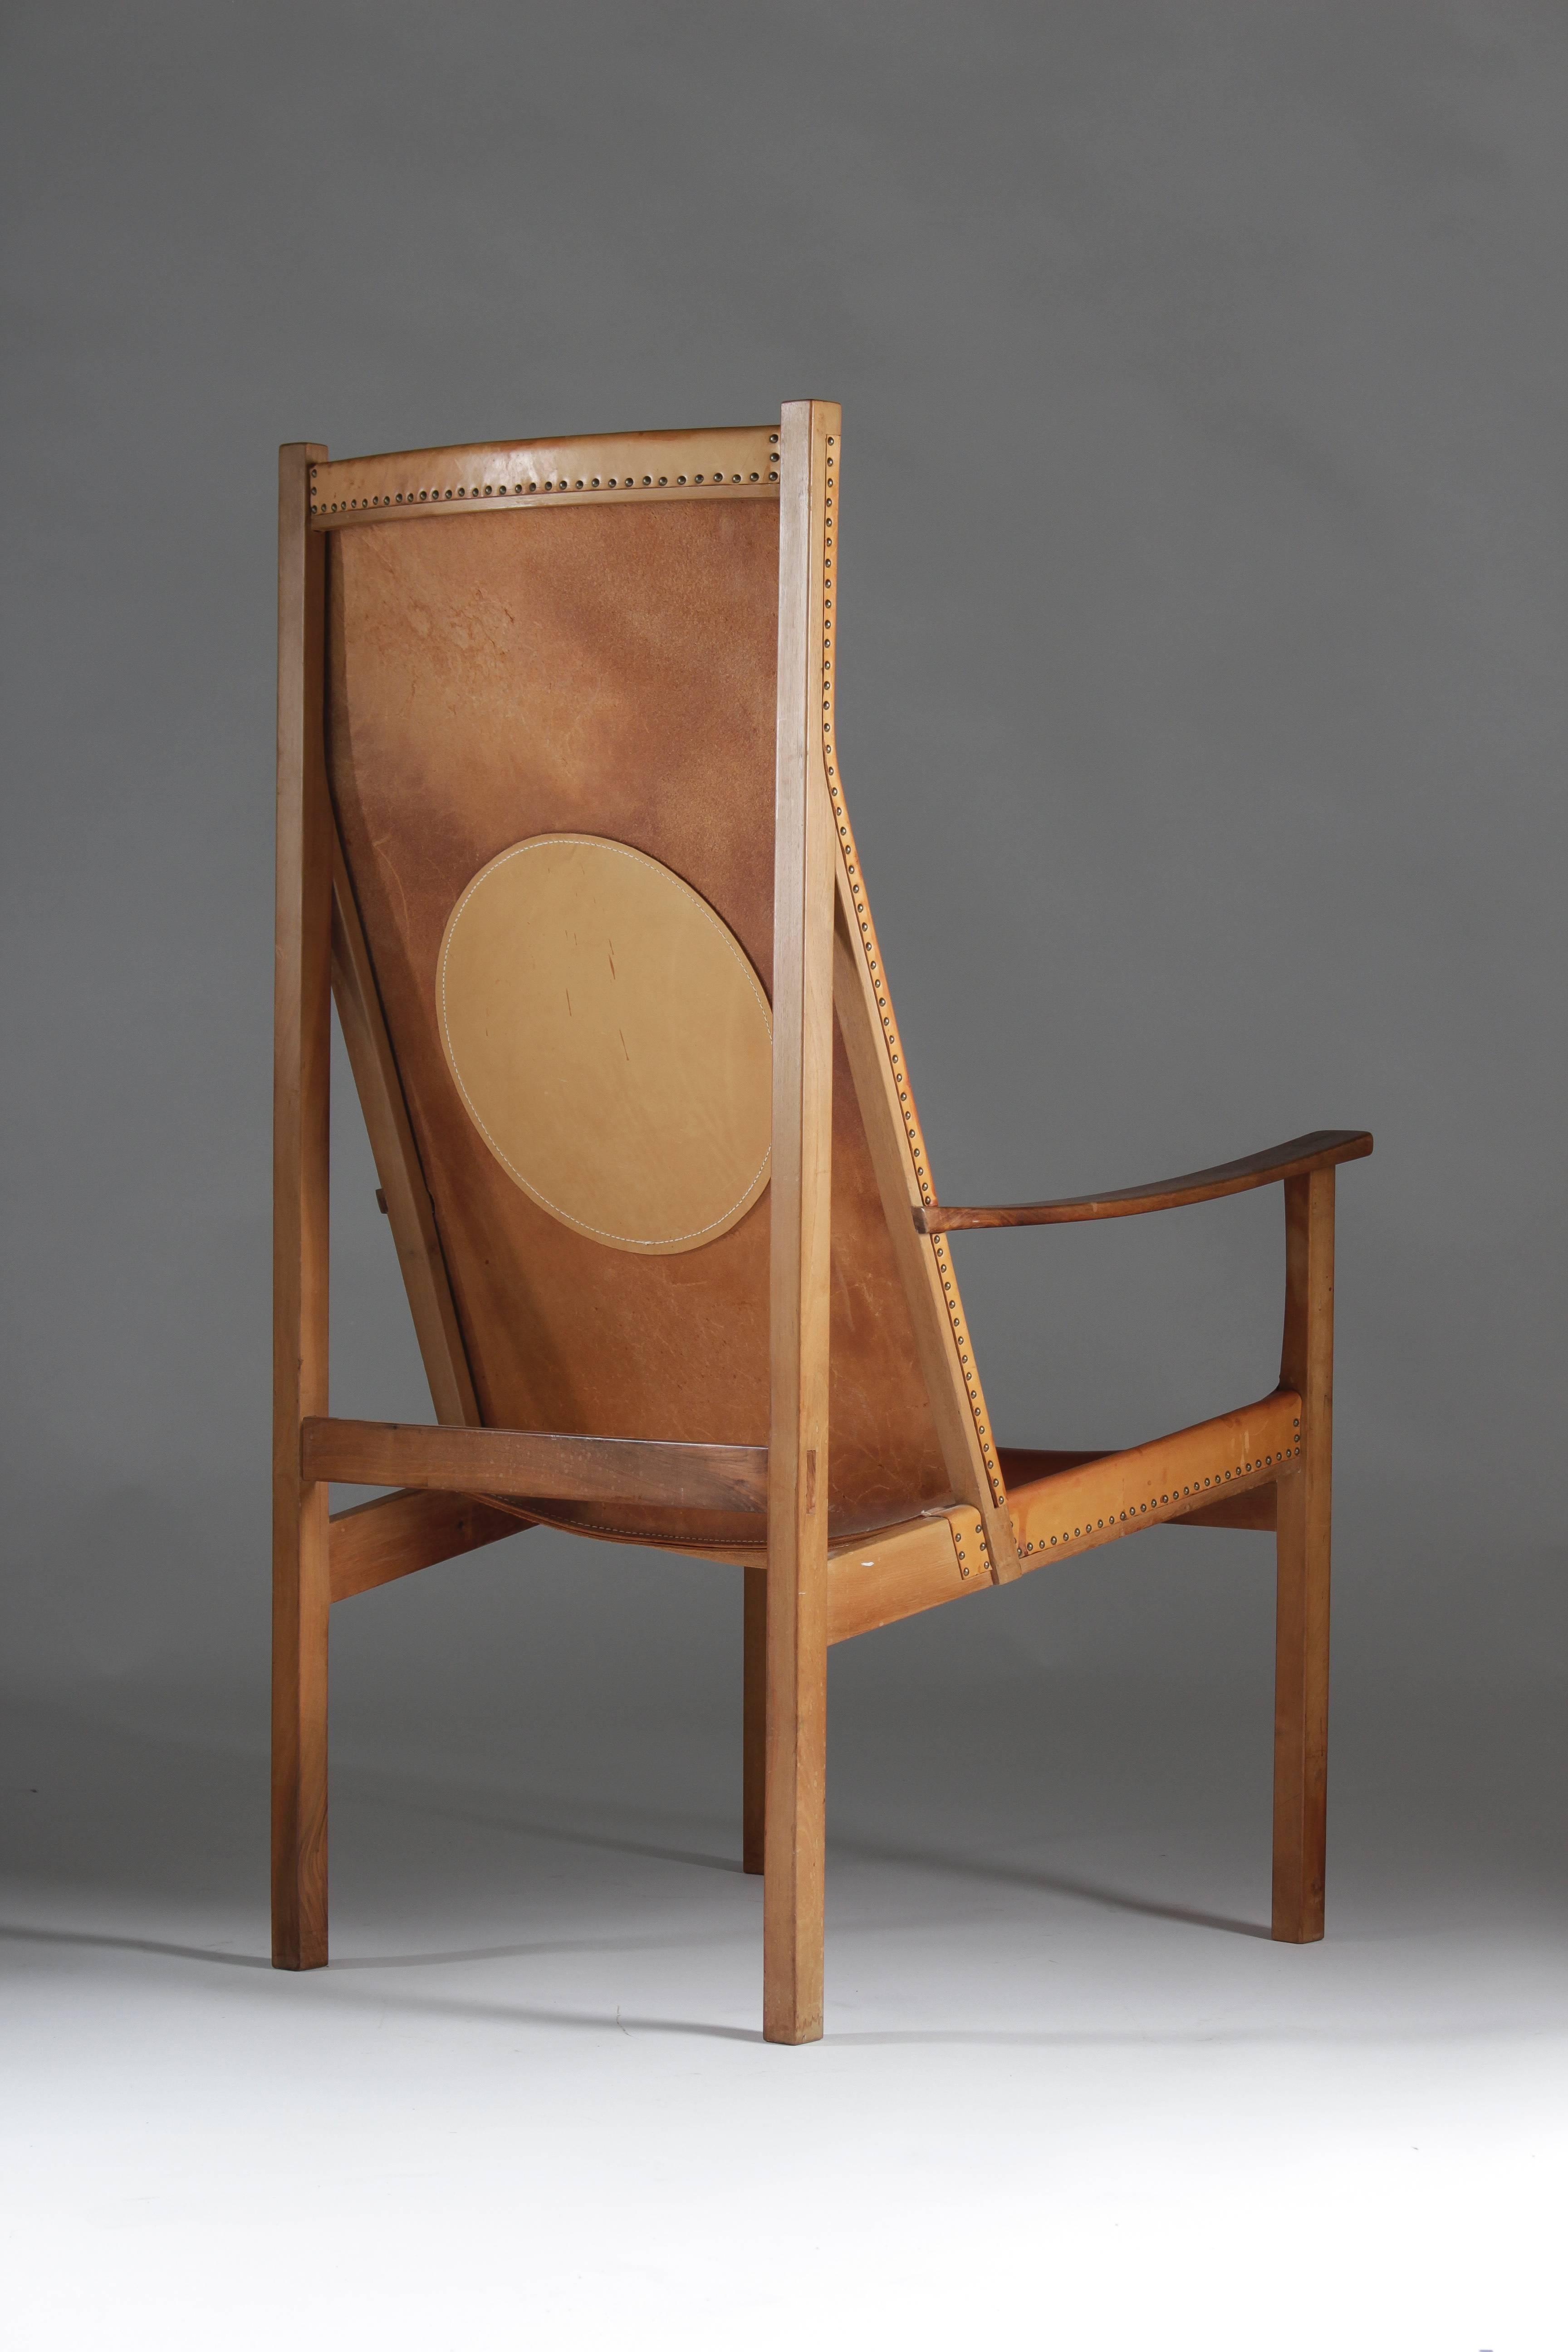 This chair is designed Swedish architect Egon Jonason, a Stockholm-based architect mostly known for the buildings he designed. According to his wife, however, he also created two-chair models during the 1960s, for which he hired craftsmen to